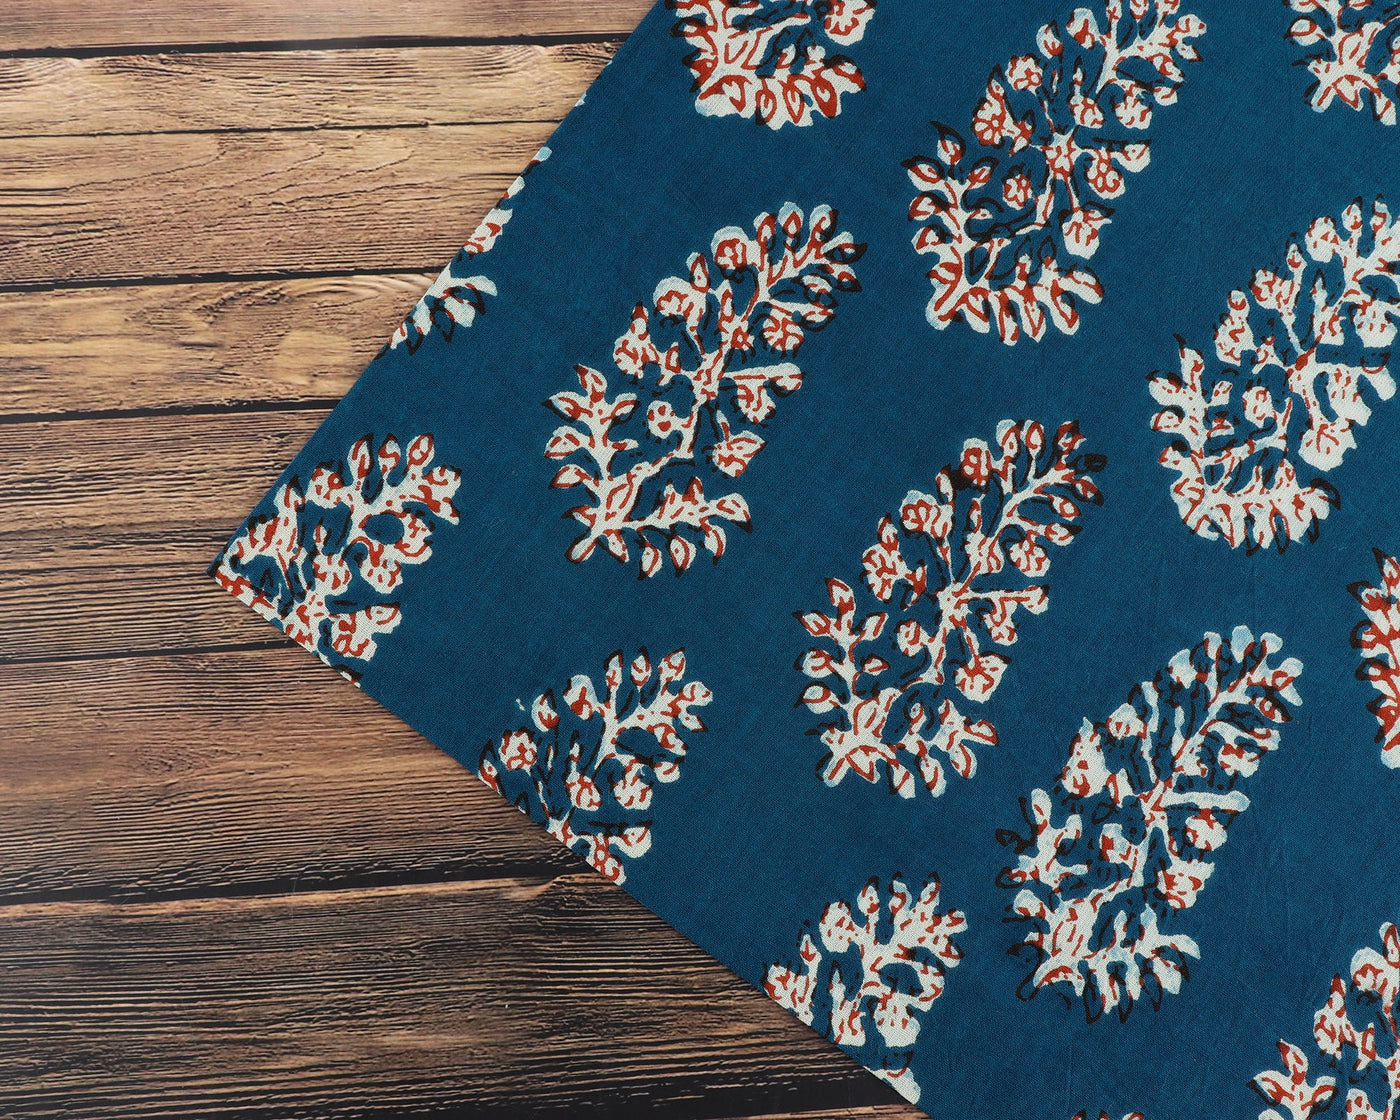 Fabricrush Prussian Blue, Red and White Indian Floral Printed Pure Cotton Cloth Napkins, Christmas Gift, 18x18"Cocktail Napkins, 20x20" Dinner Napkins